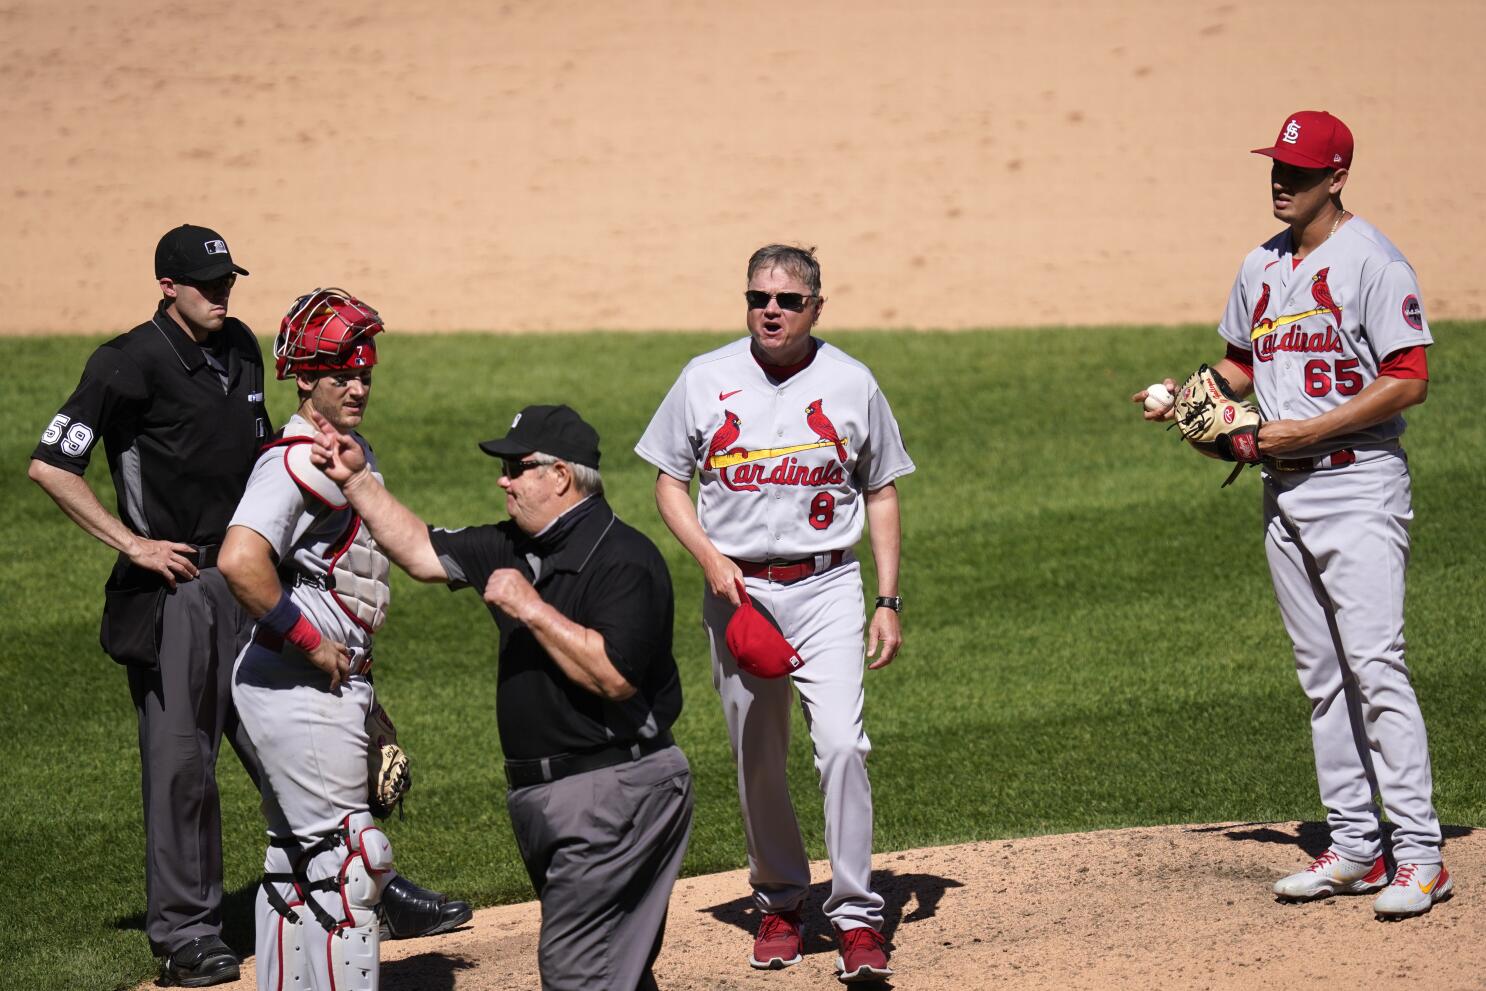 Ward's homer leads Angels to 5-1 win, Cards' 4th loss in row